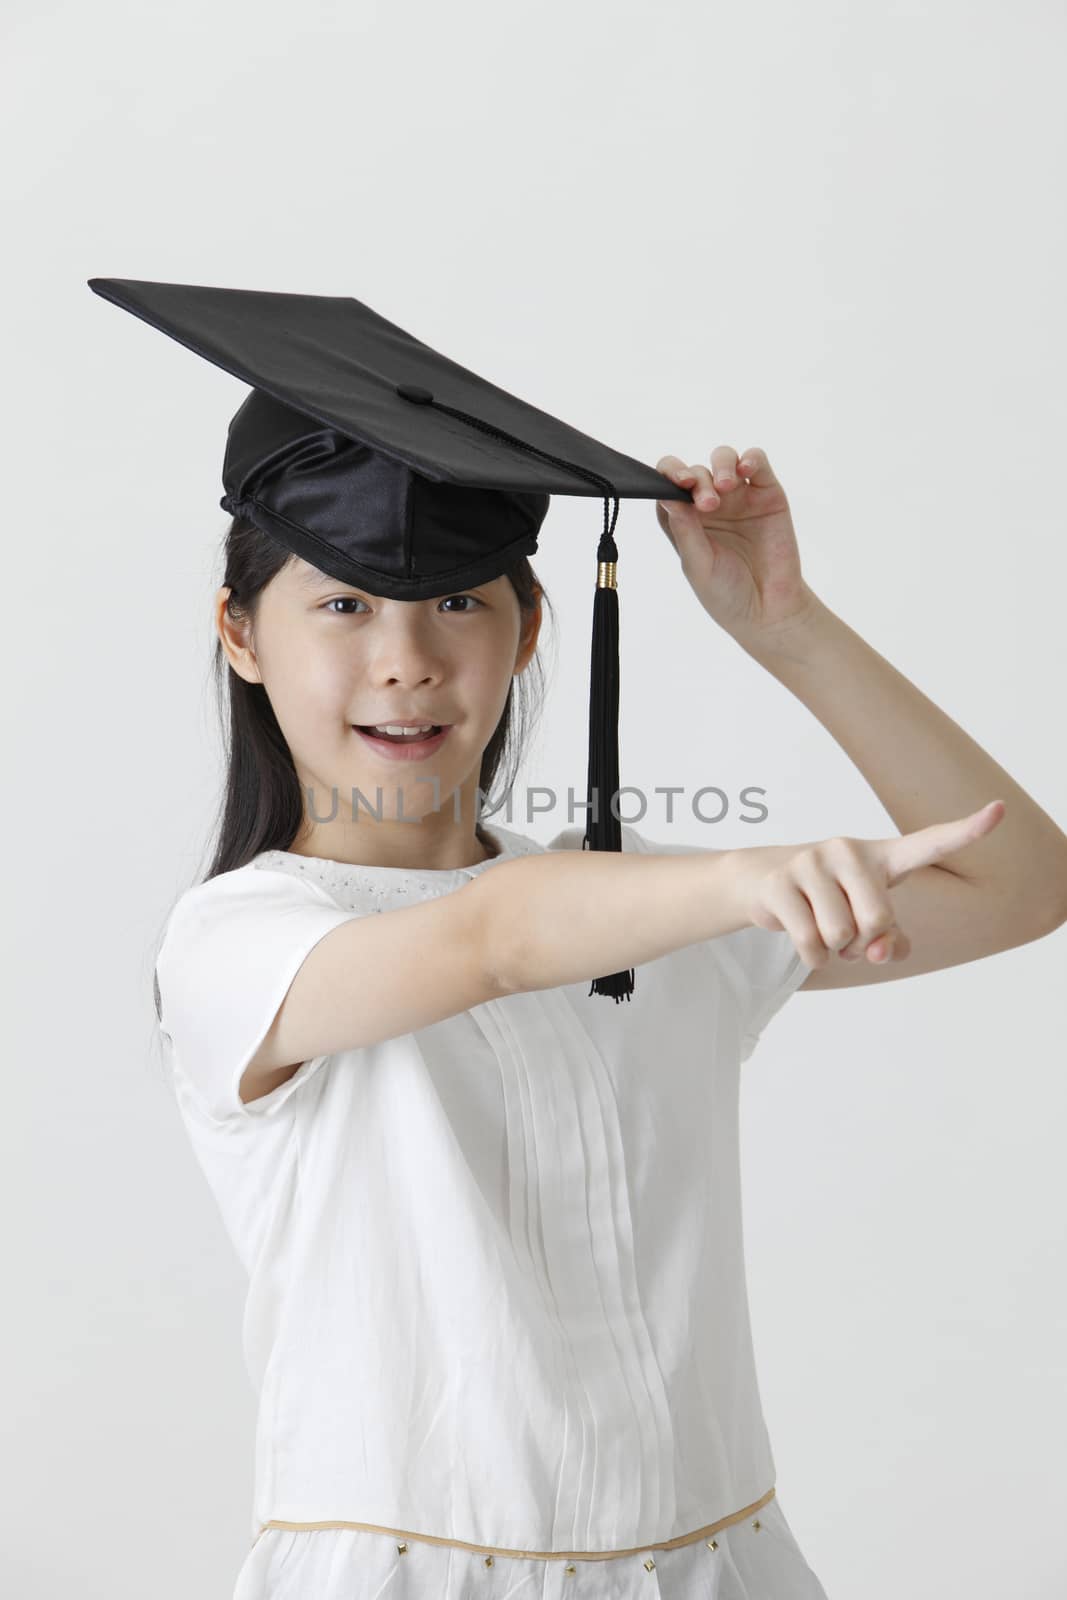 girl with the mortar board pointing